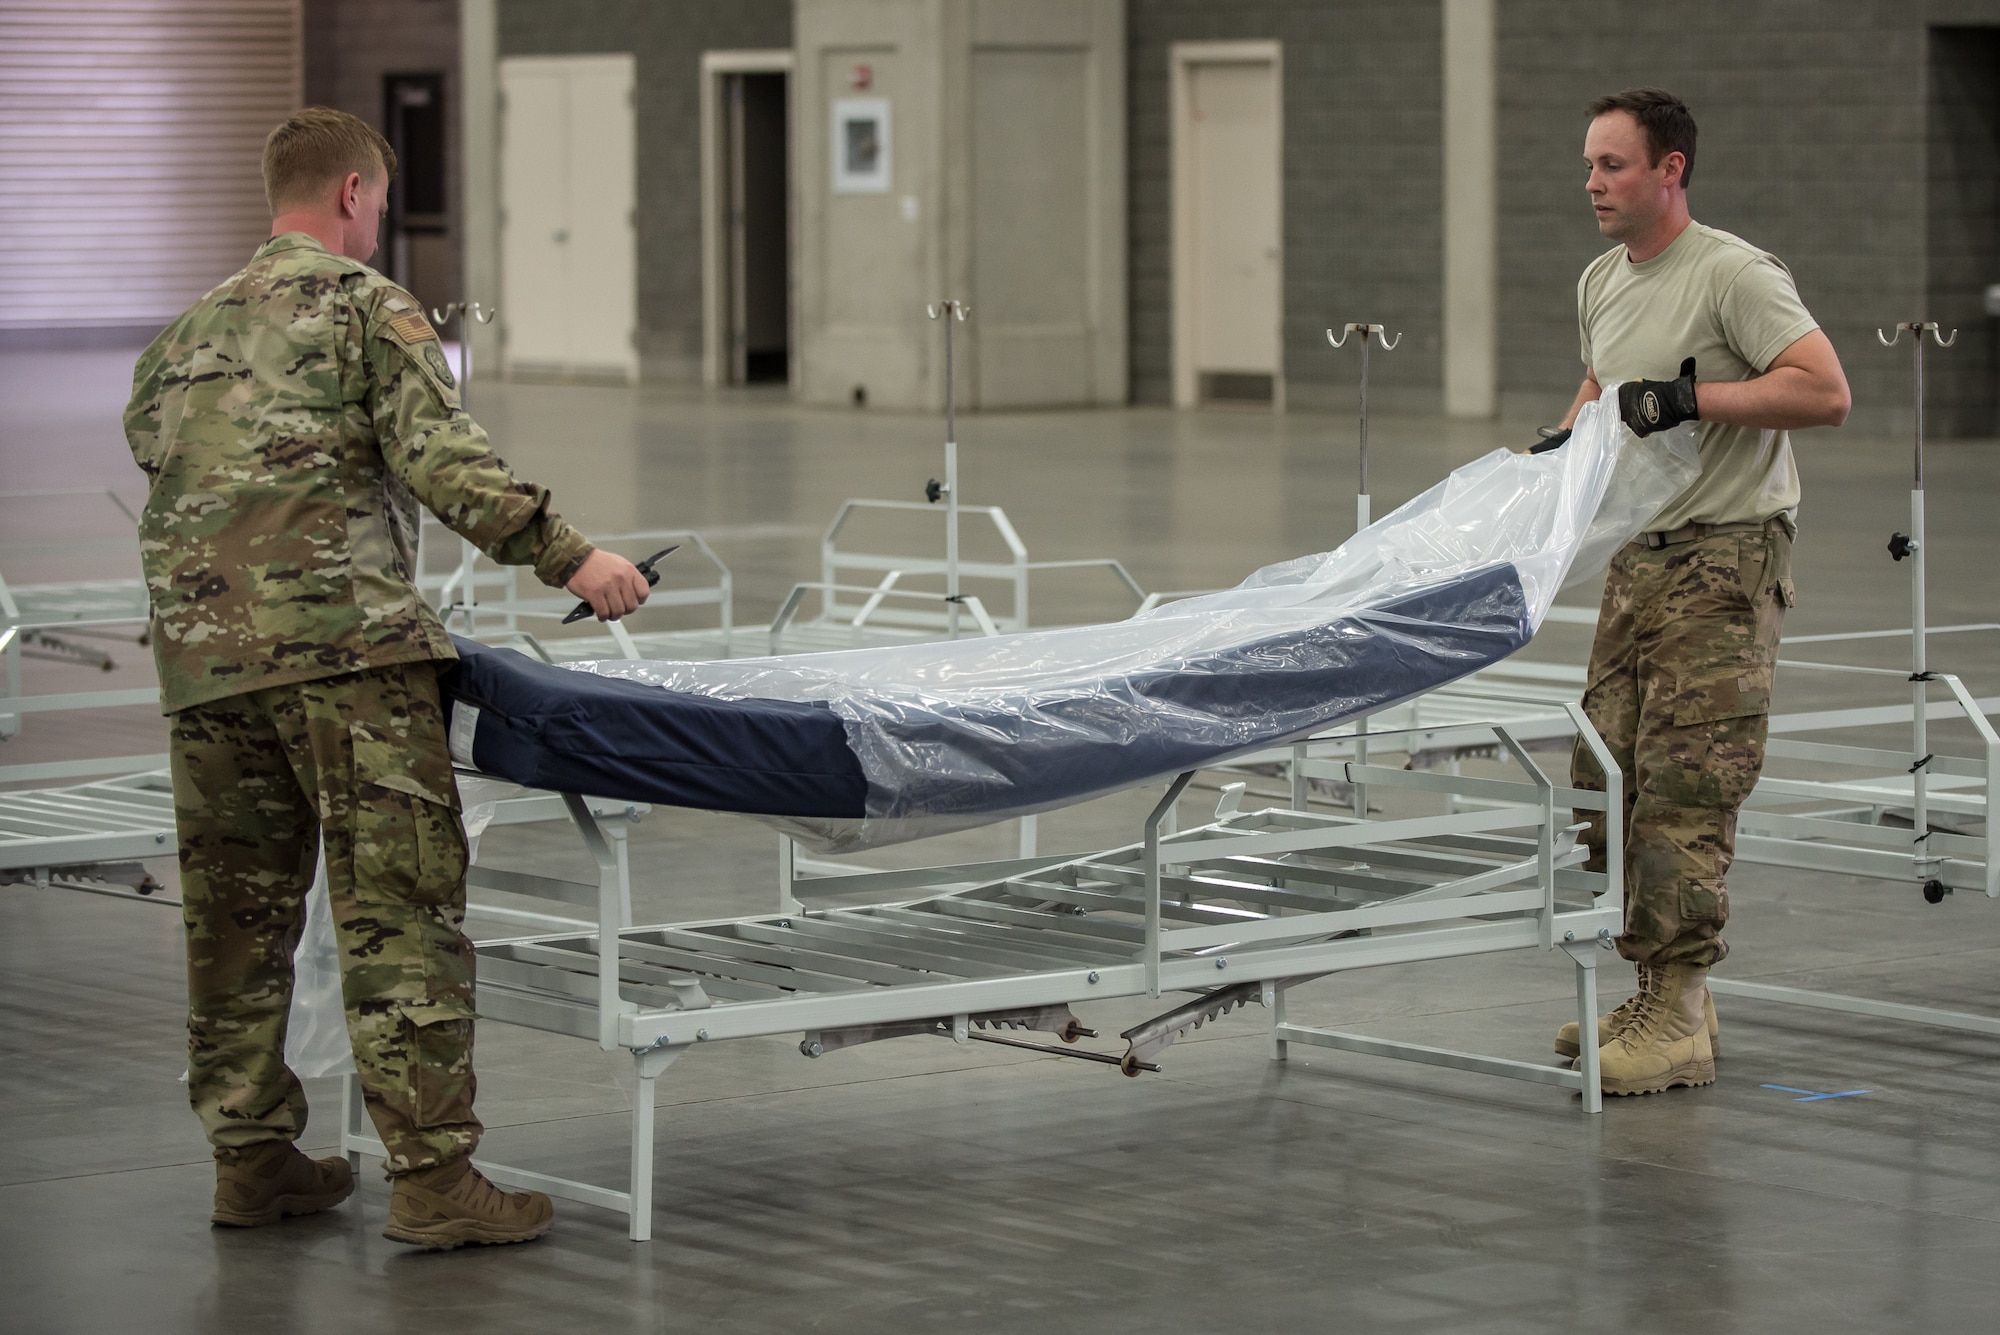 Capt. Jason Selby (left) and Staff Sgt. Wesley Hack of the Kentucky Air National Guard's 123rd Civil Engineer Squadron place a mattress on a hospital bed at the Kentucky Fair and Exposition Center in Louisville, Ky., April 11, 2020. The site, which is expected to be operational April 15, will serve as an Alternate Care Facility for patients suffering from COVID-19 if area hospitals exceed available capacity. The location initially can treat up to 288 patients and is scalable to 2,000 beds. (U.S. Air National Guard photo by Dale Greer)